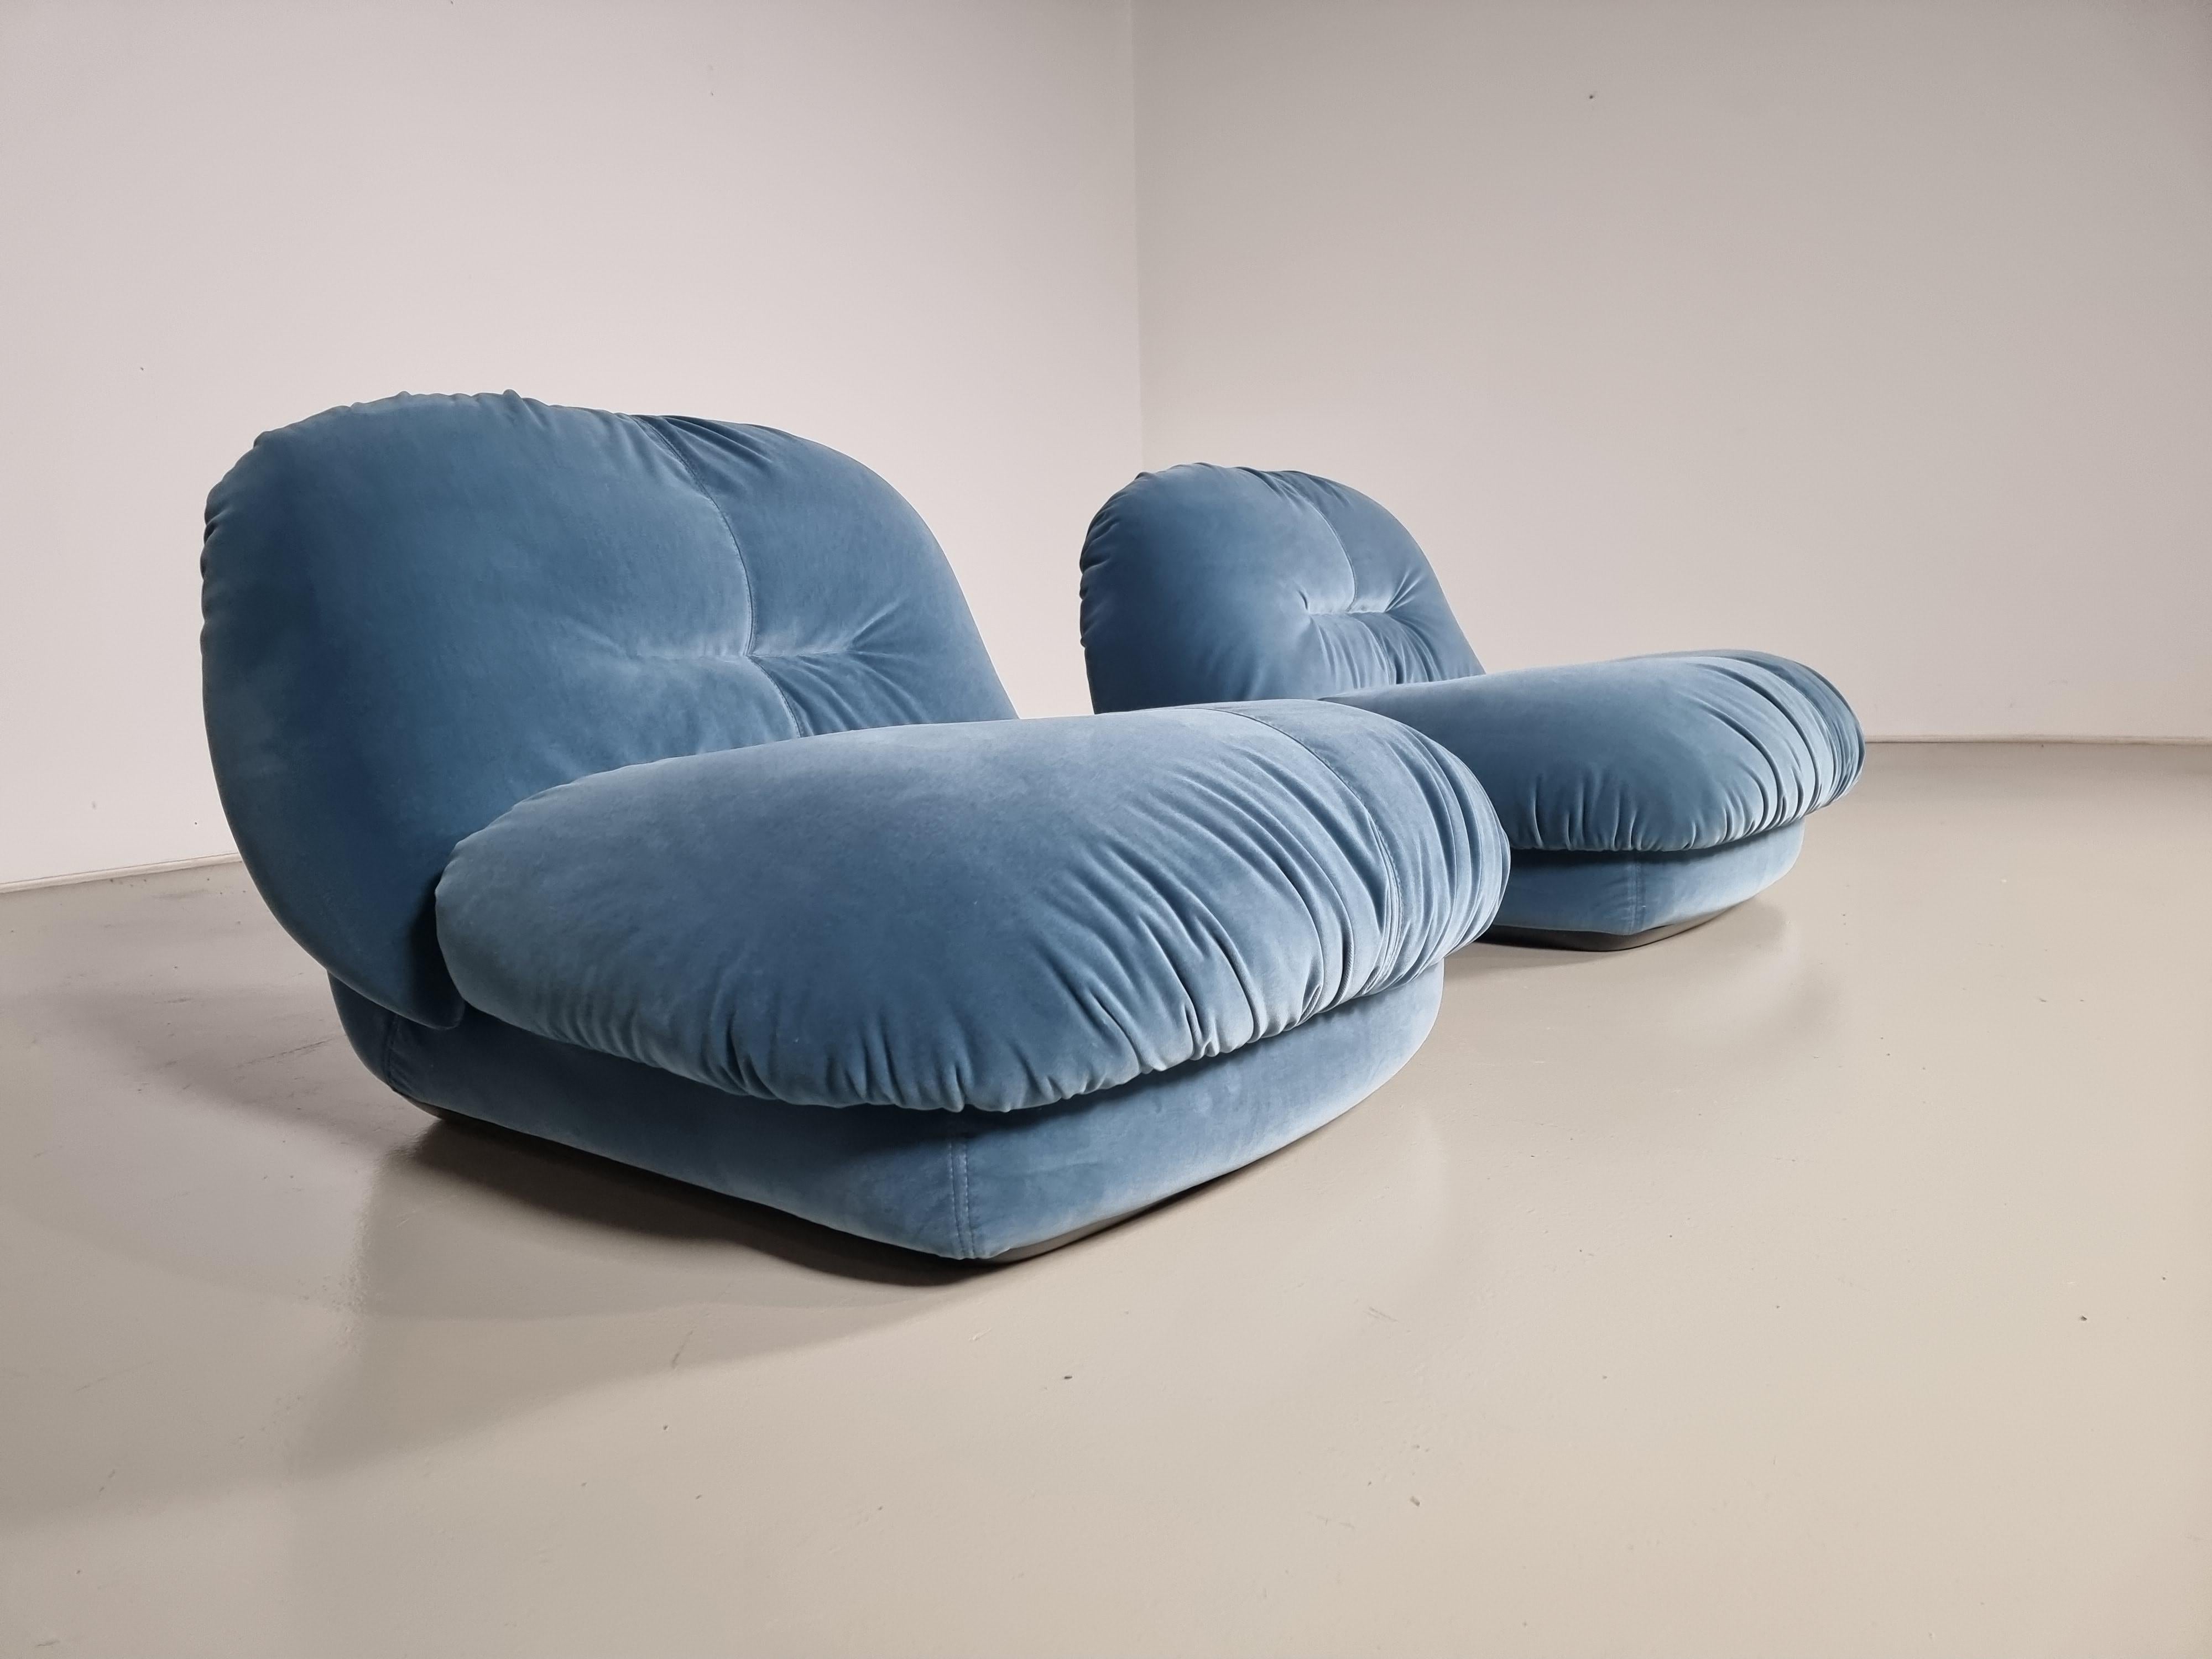 Alberto Rosselli, Saporiti, lounge chairs, 1970s.

These rare lounge chairs are similar to Pierre Paulin’s ‘Pacha’ easy chair. This example also consists of a round seat and backrest on a low base. The bulky, rounded seat has an inviting character.